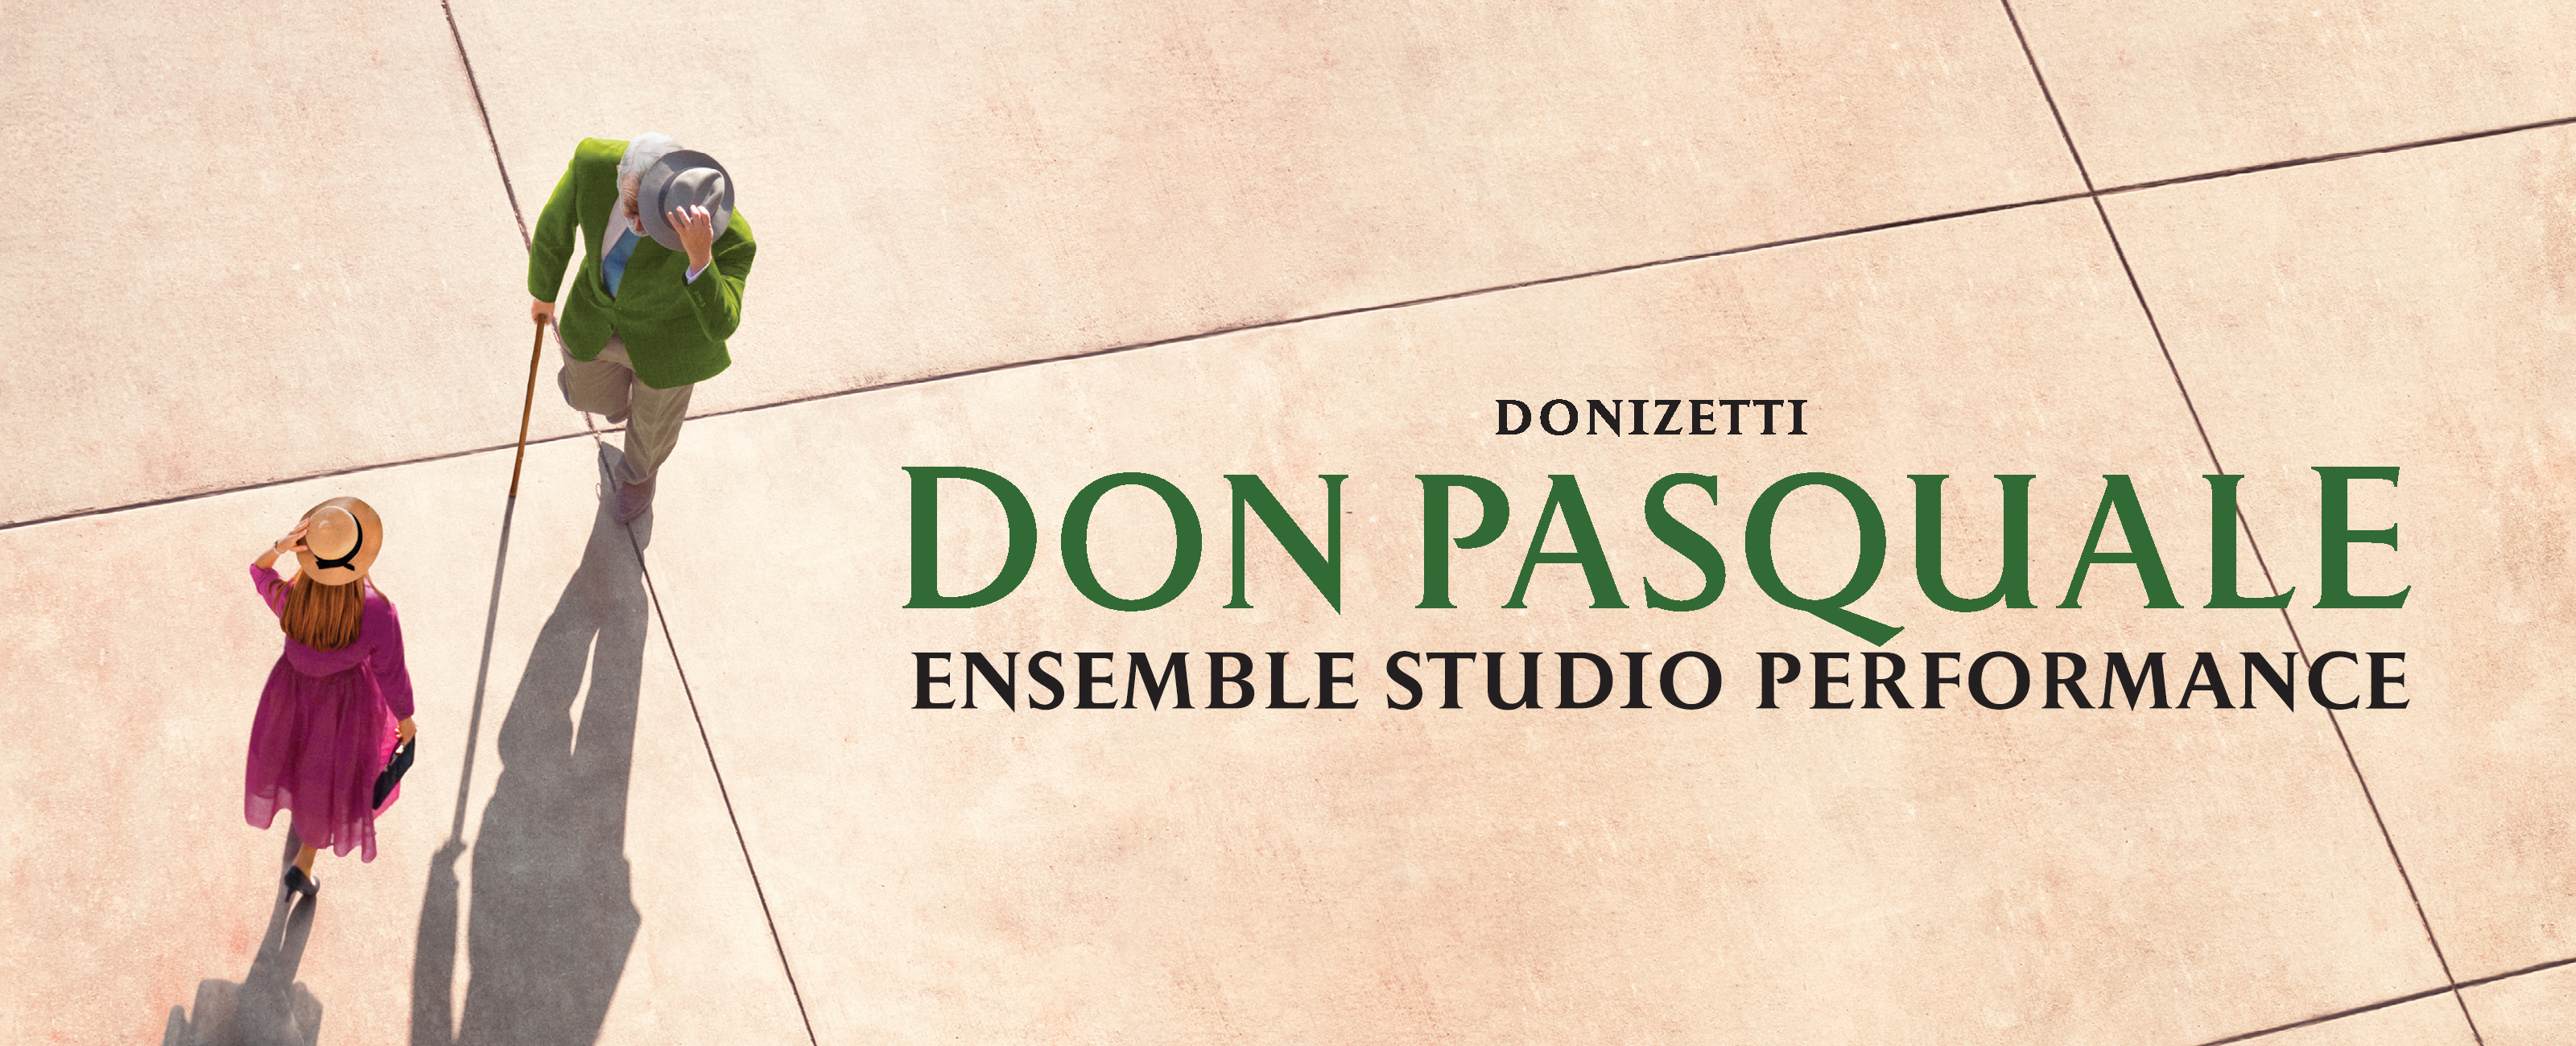 Don Pasquale banner 